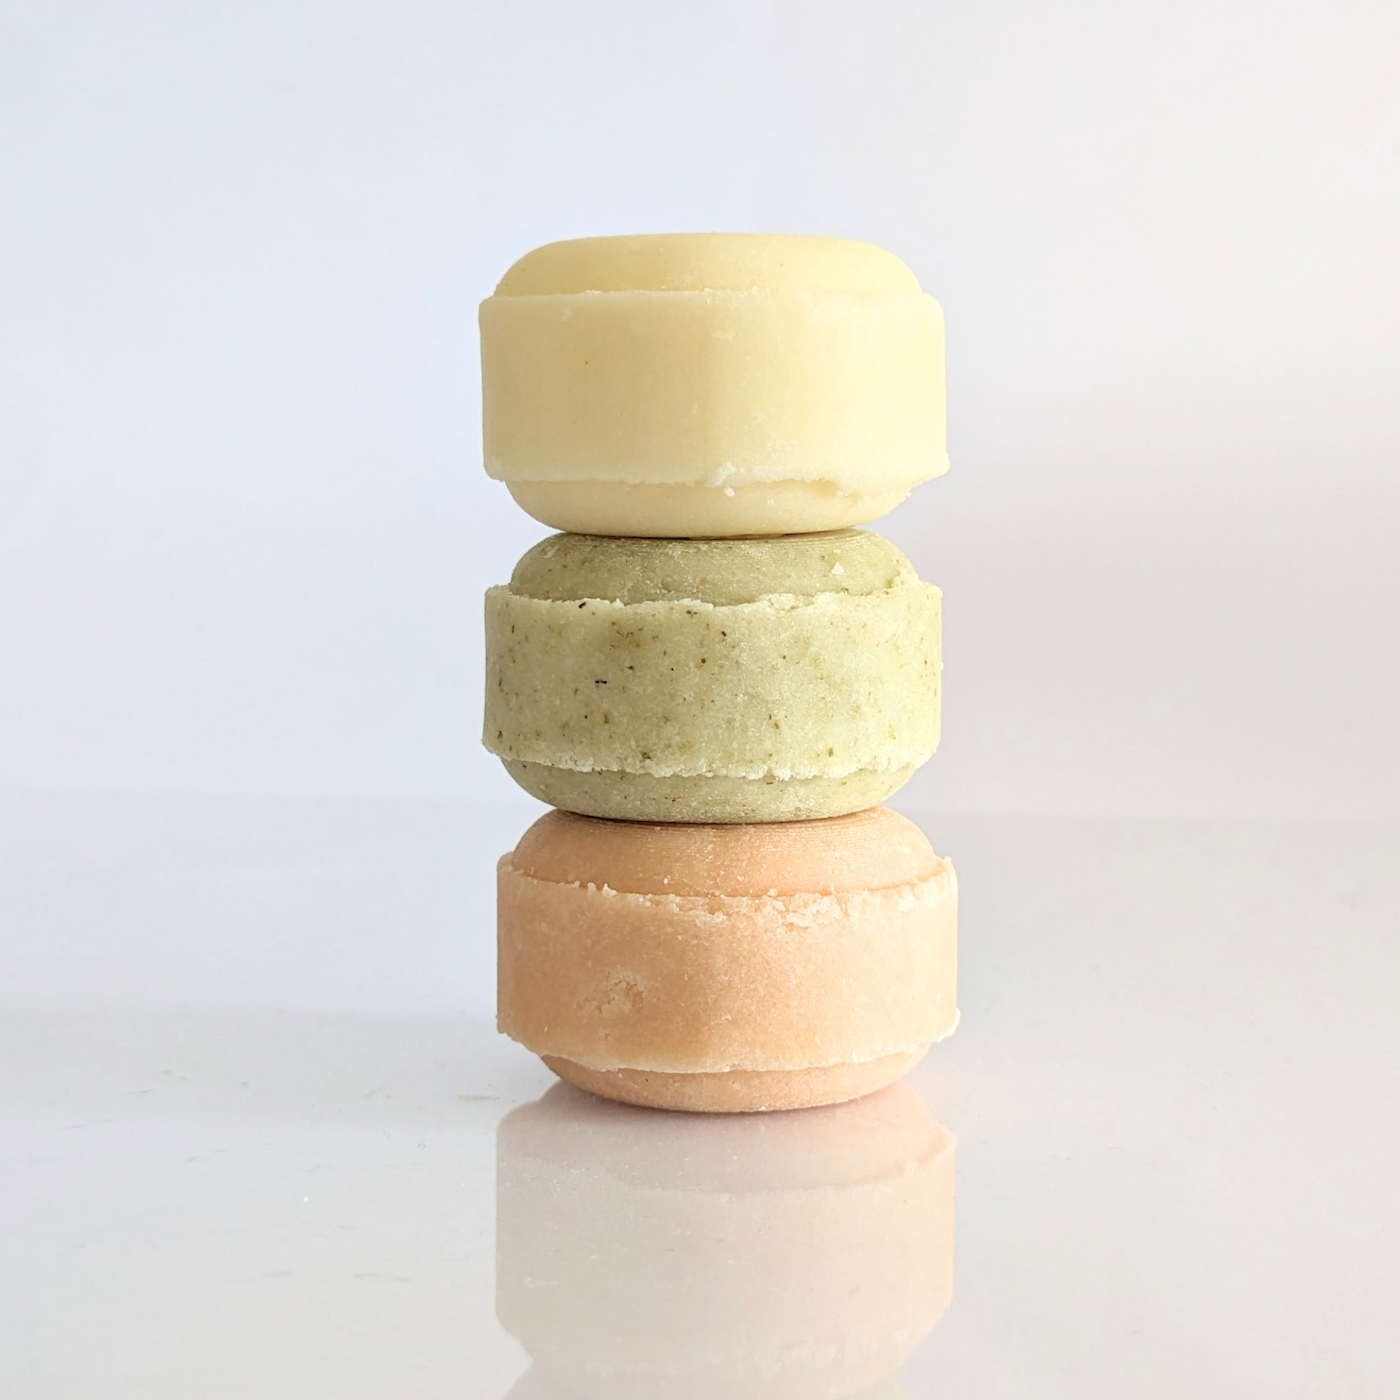 A stack of solid shampoo bars in yellow, green and pink